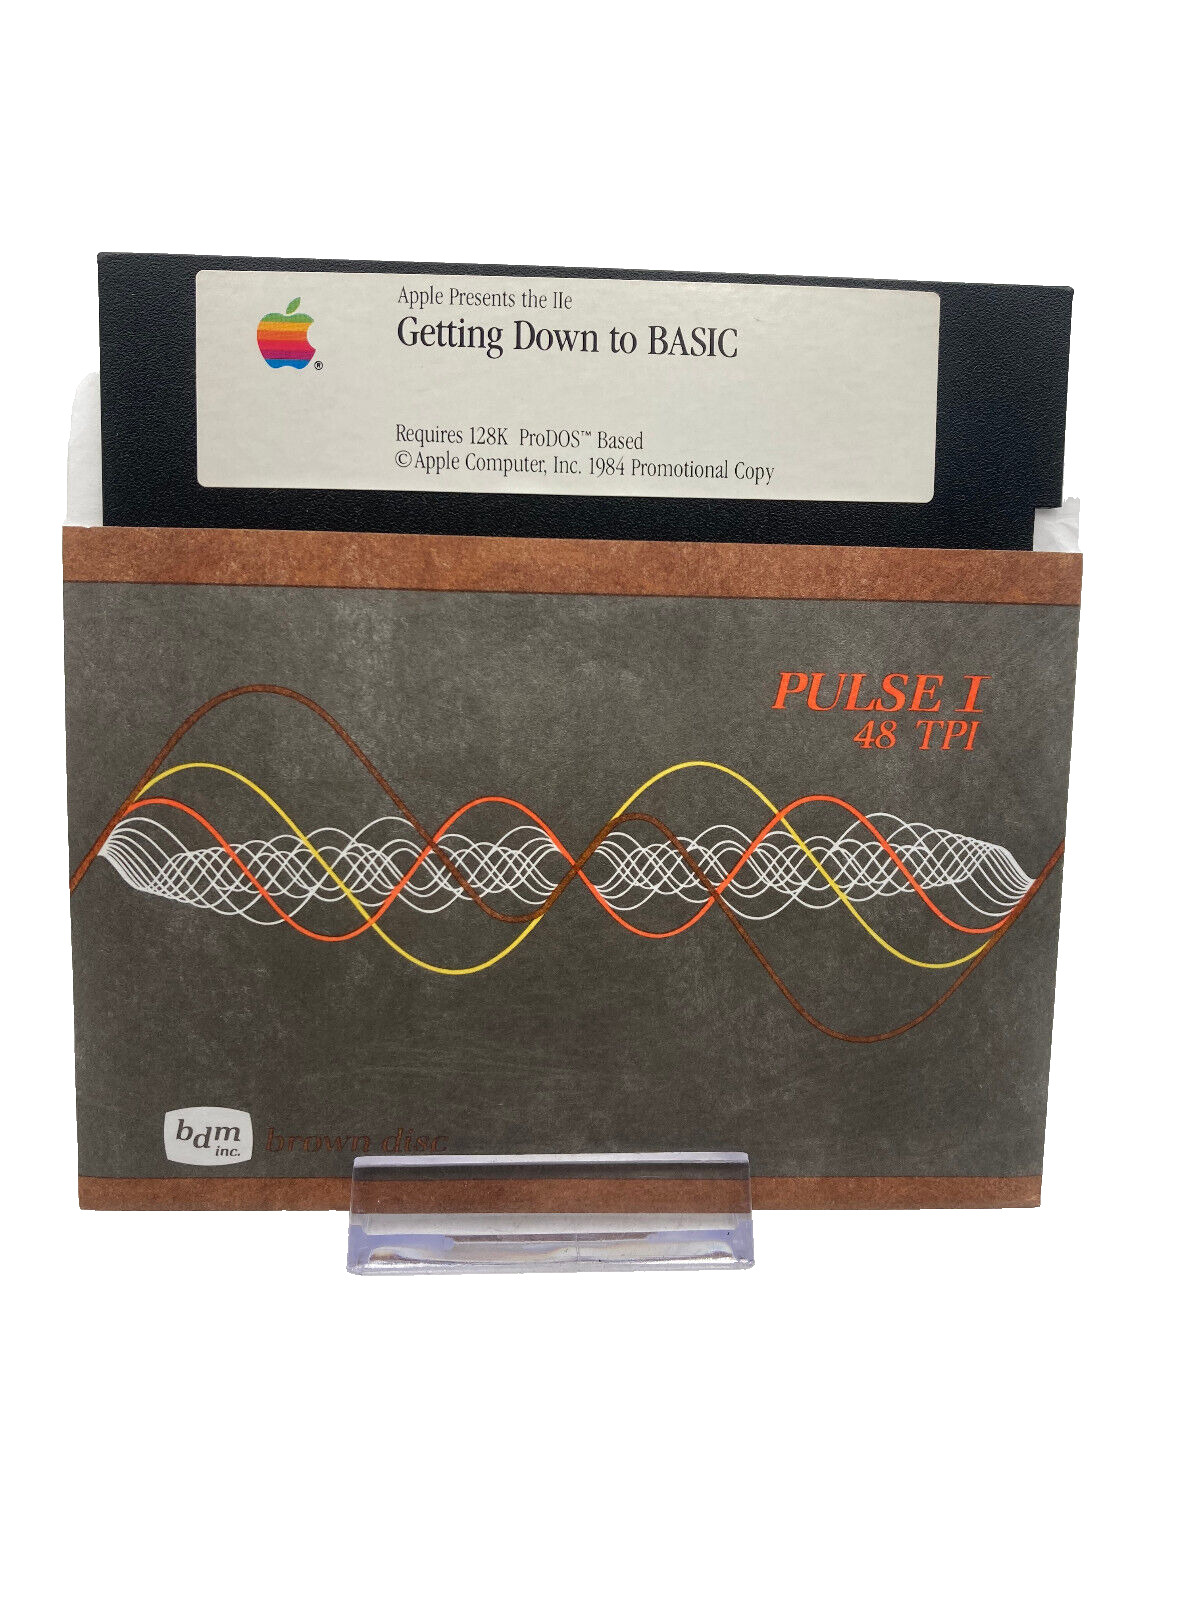 Apple Presents the IIe Getting Down to Basic 128K ProDOS Based 1984 5.25 Floppy